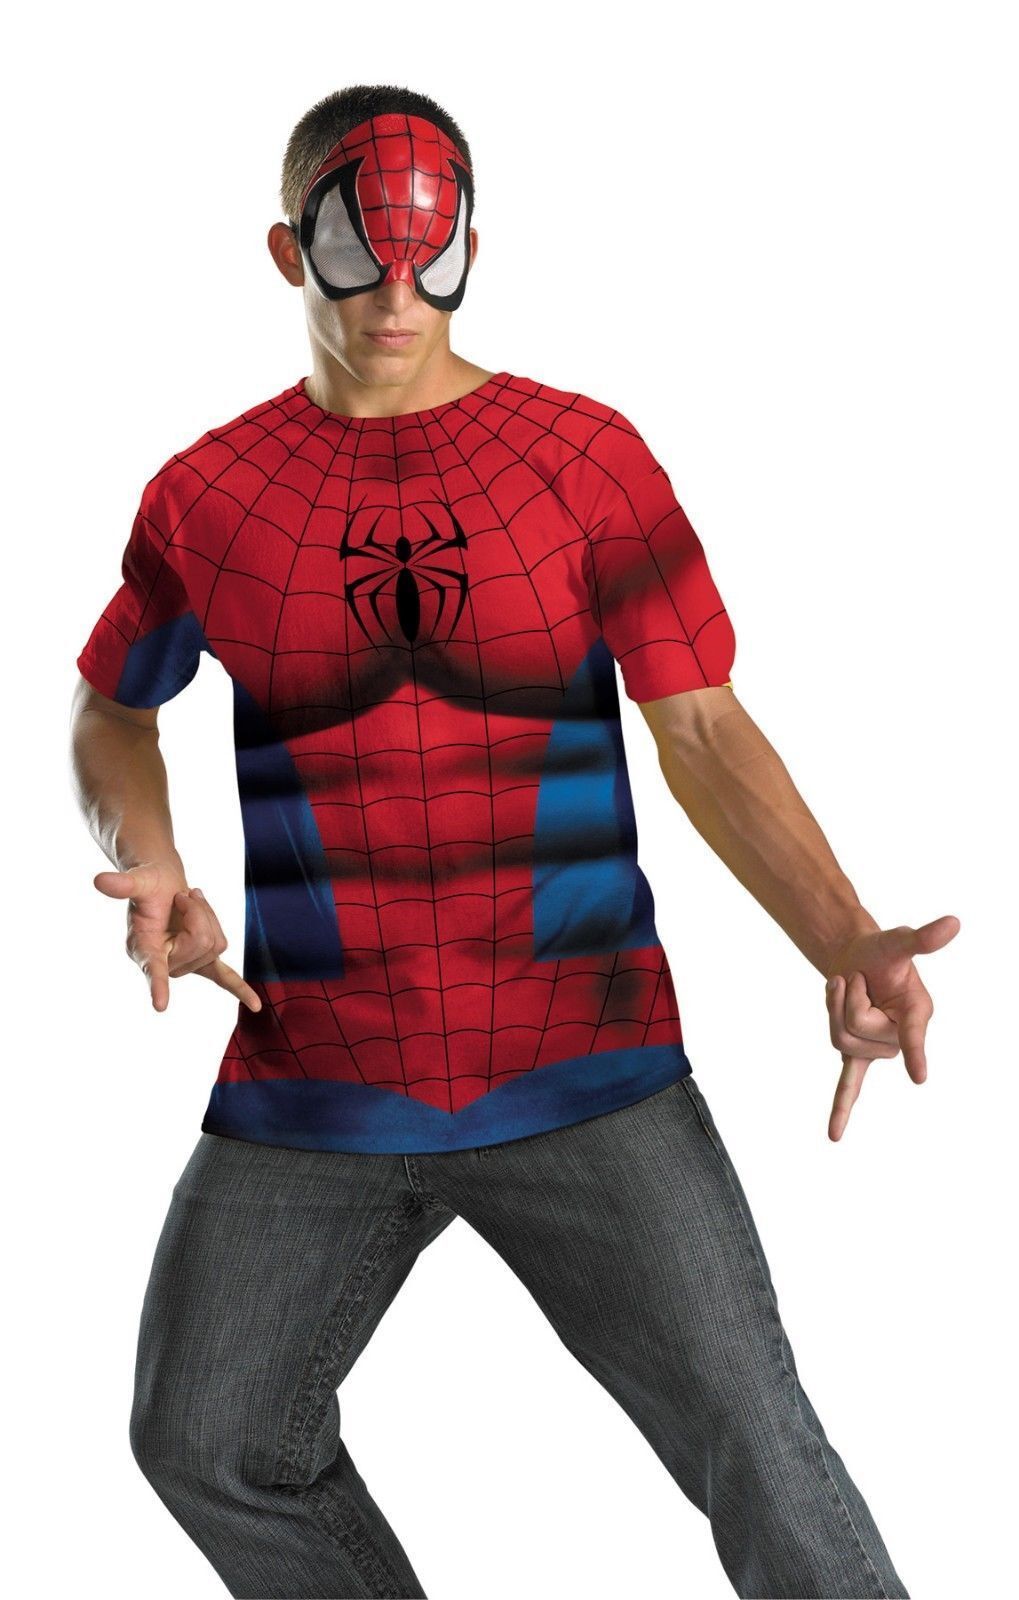 Primary image for Spider-Man Comic Book Superhero MEN'S 42-46 Size Shirt & Mask Easy Adult Costume